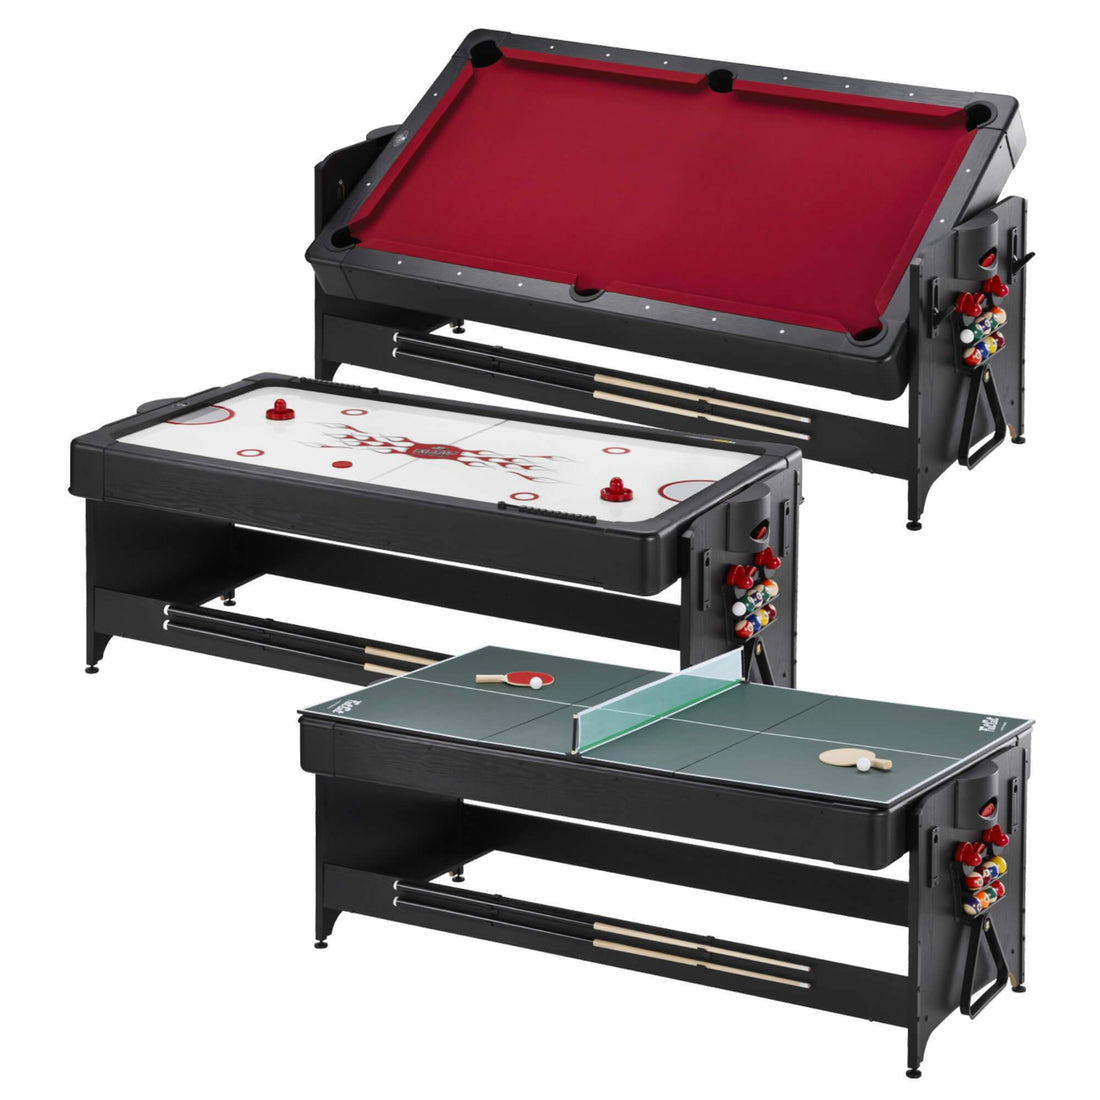 The Best Game Tables | 2021 Buyers Guide - Gaming Blaze